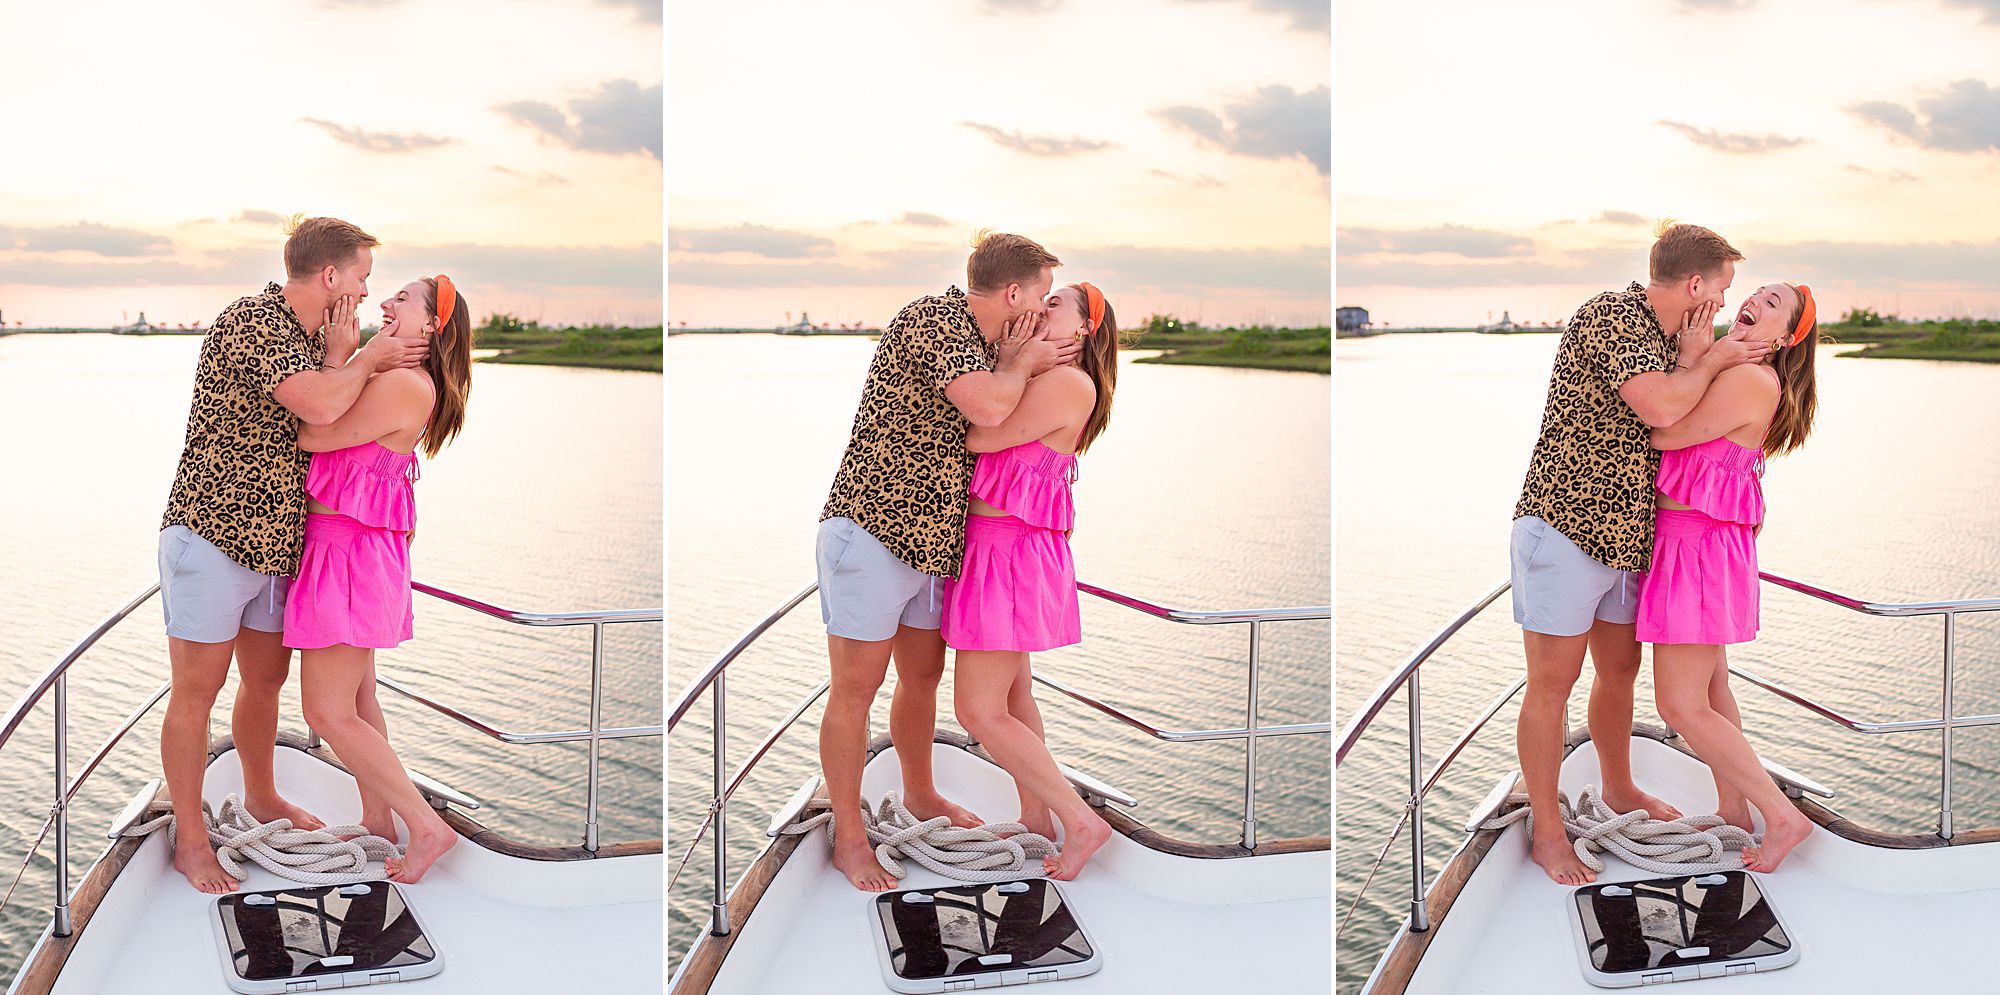 A husband kisses his wife on the back of a catamaran and makes her laugh.